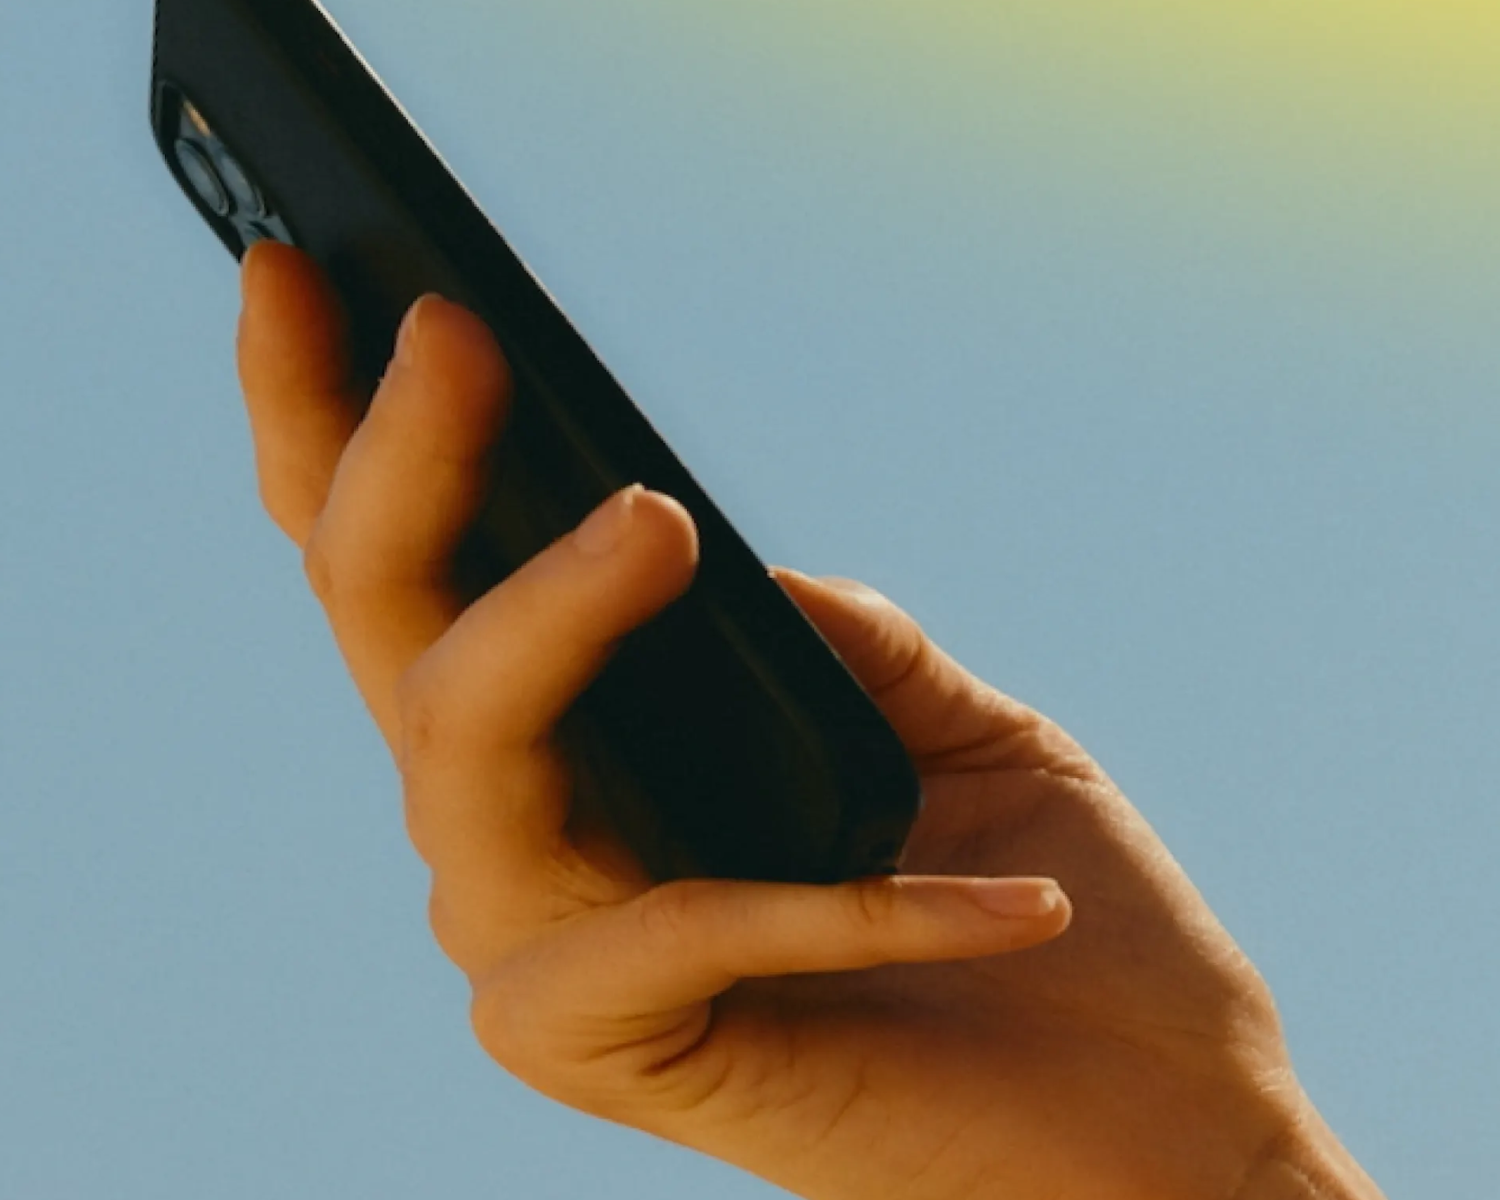 photograph of a hand holding a phone